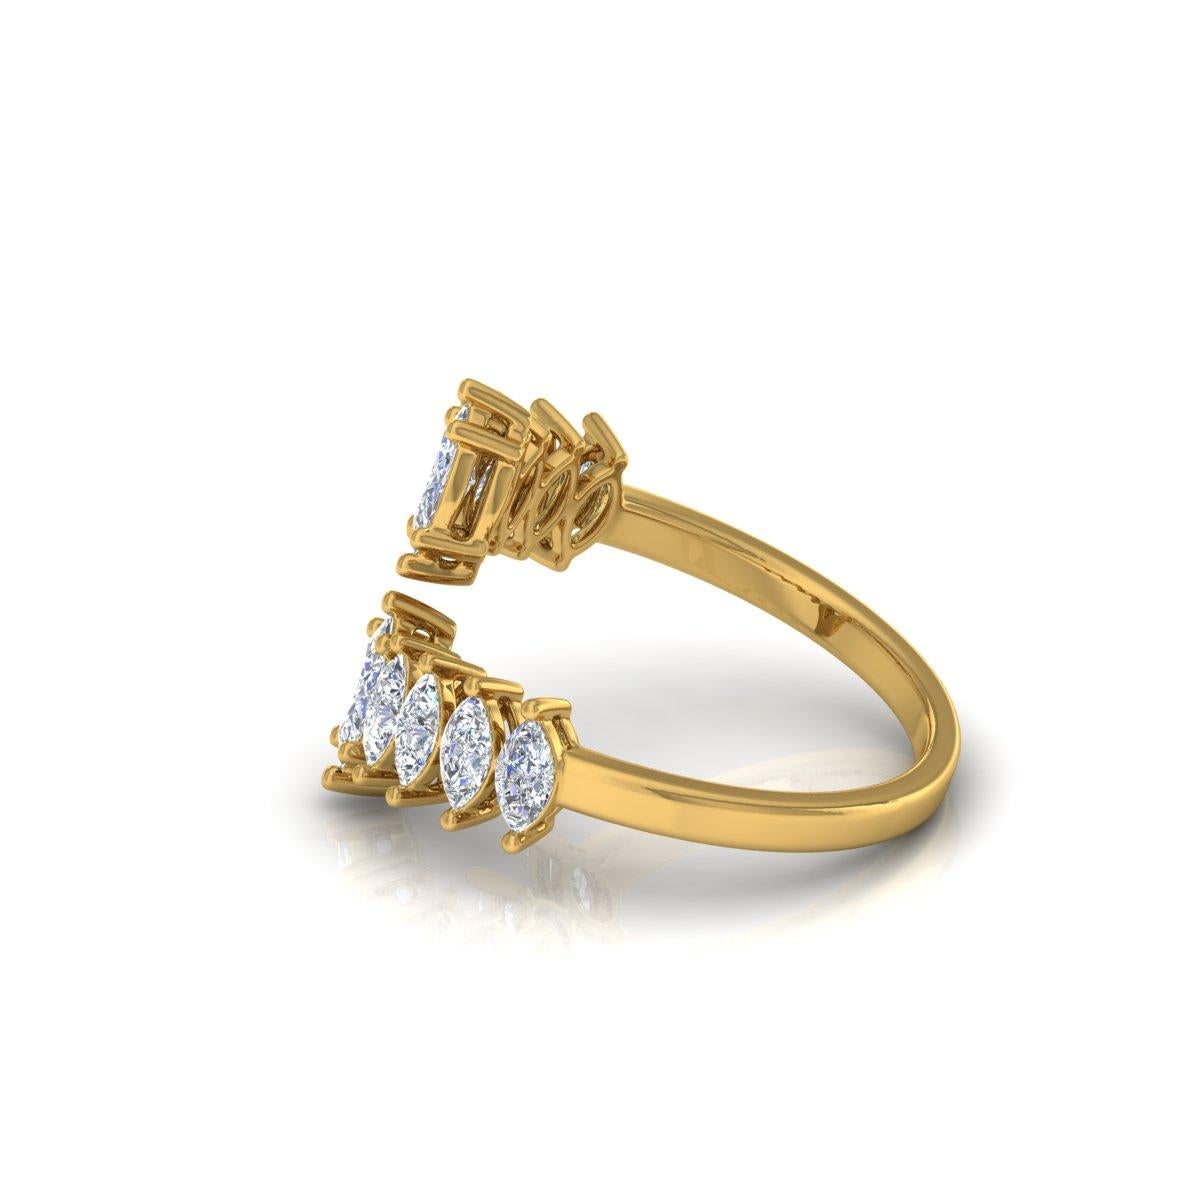 Item Code :- SER-2851H
Gross Wt. :- 3.30 gm
18k Solid Yellow Gold Wt. :- 3.00 gm
Natural Diamond Wt. :- 1.50 Ct. ( AVERAGE DIAMOND CLARITY SI1-SI2 & COLOR H-I )
Ring Size :- 7 US & All size available

✦ Sizing
.....................
We can adjust